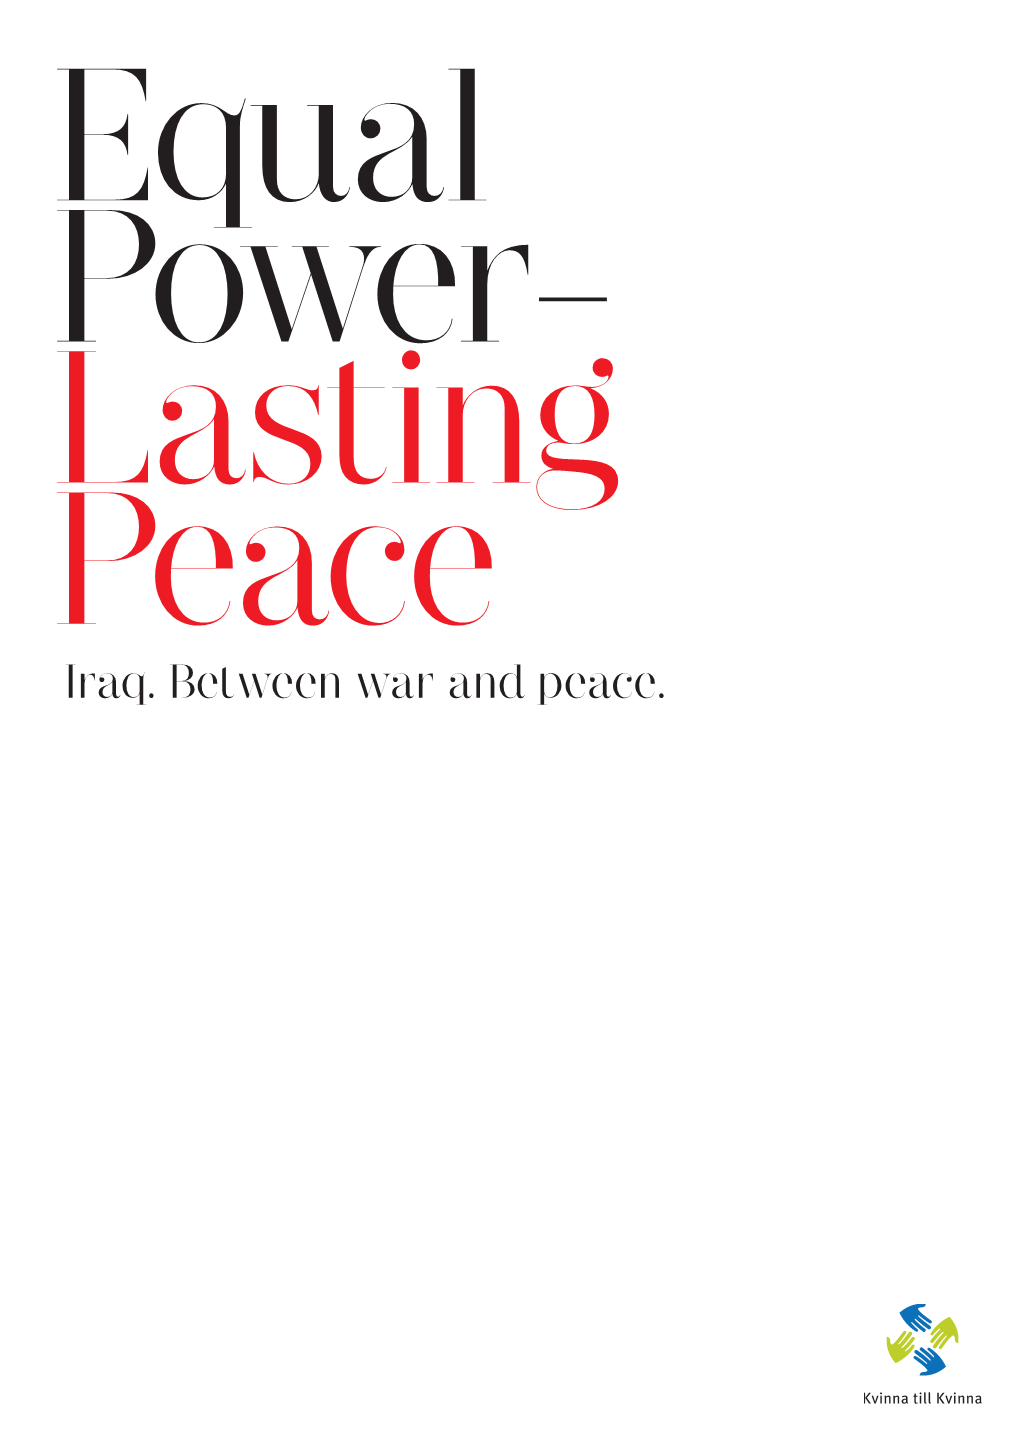 Iraq. Between War and Peace